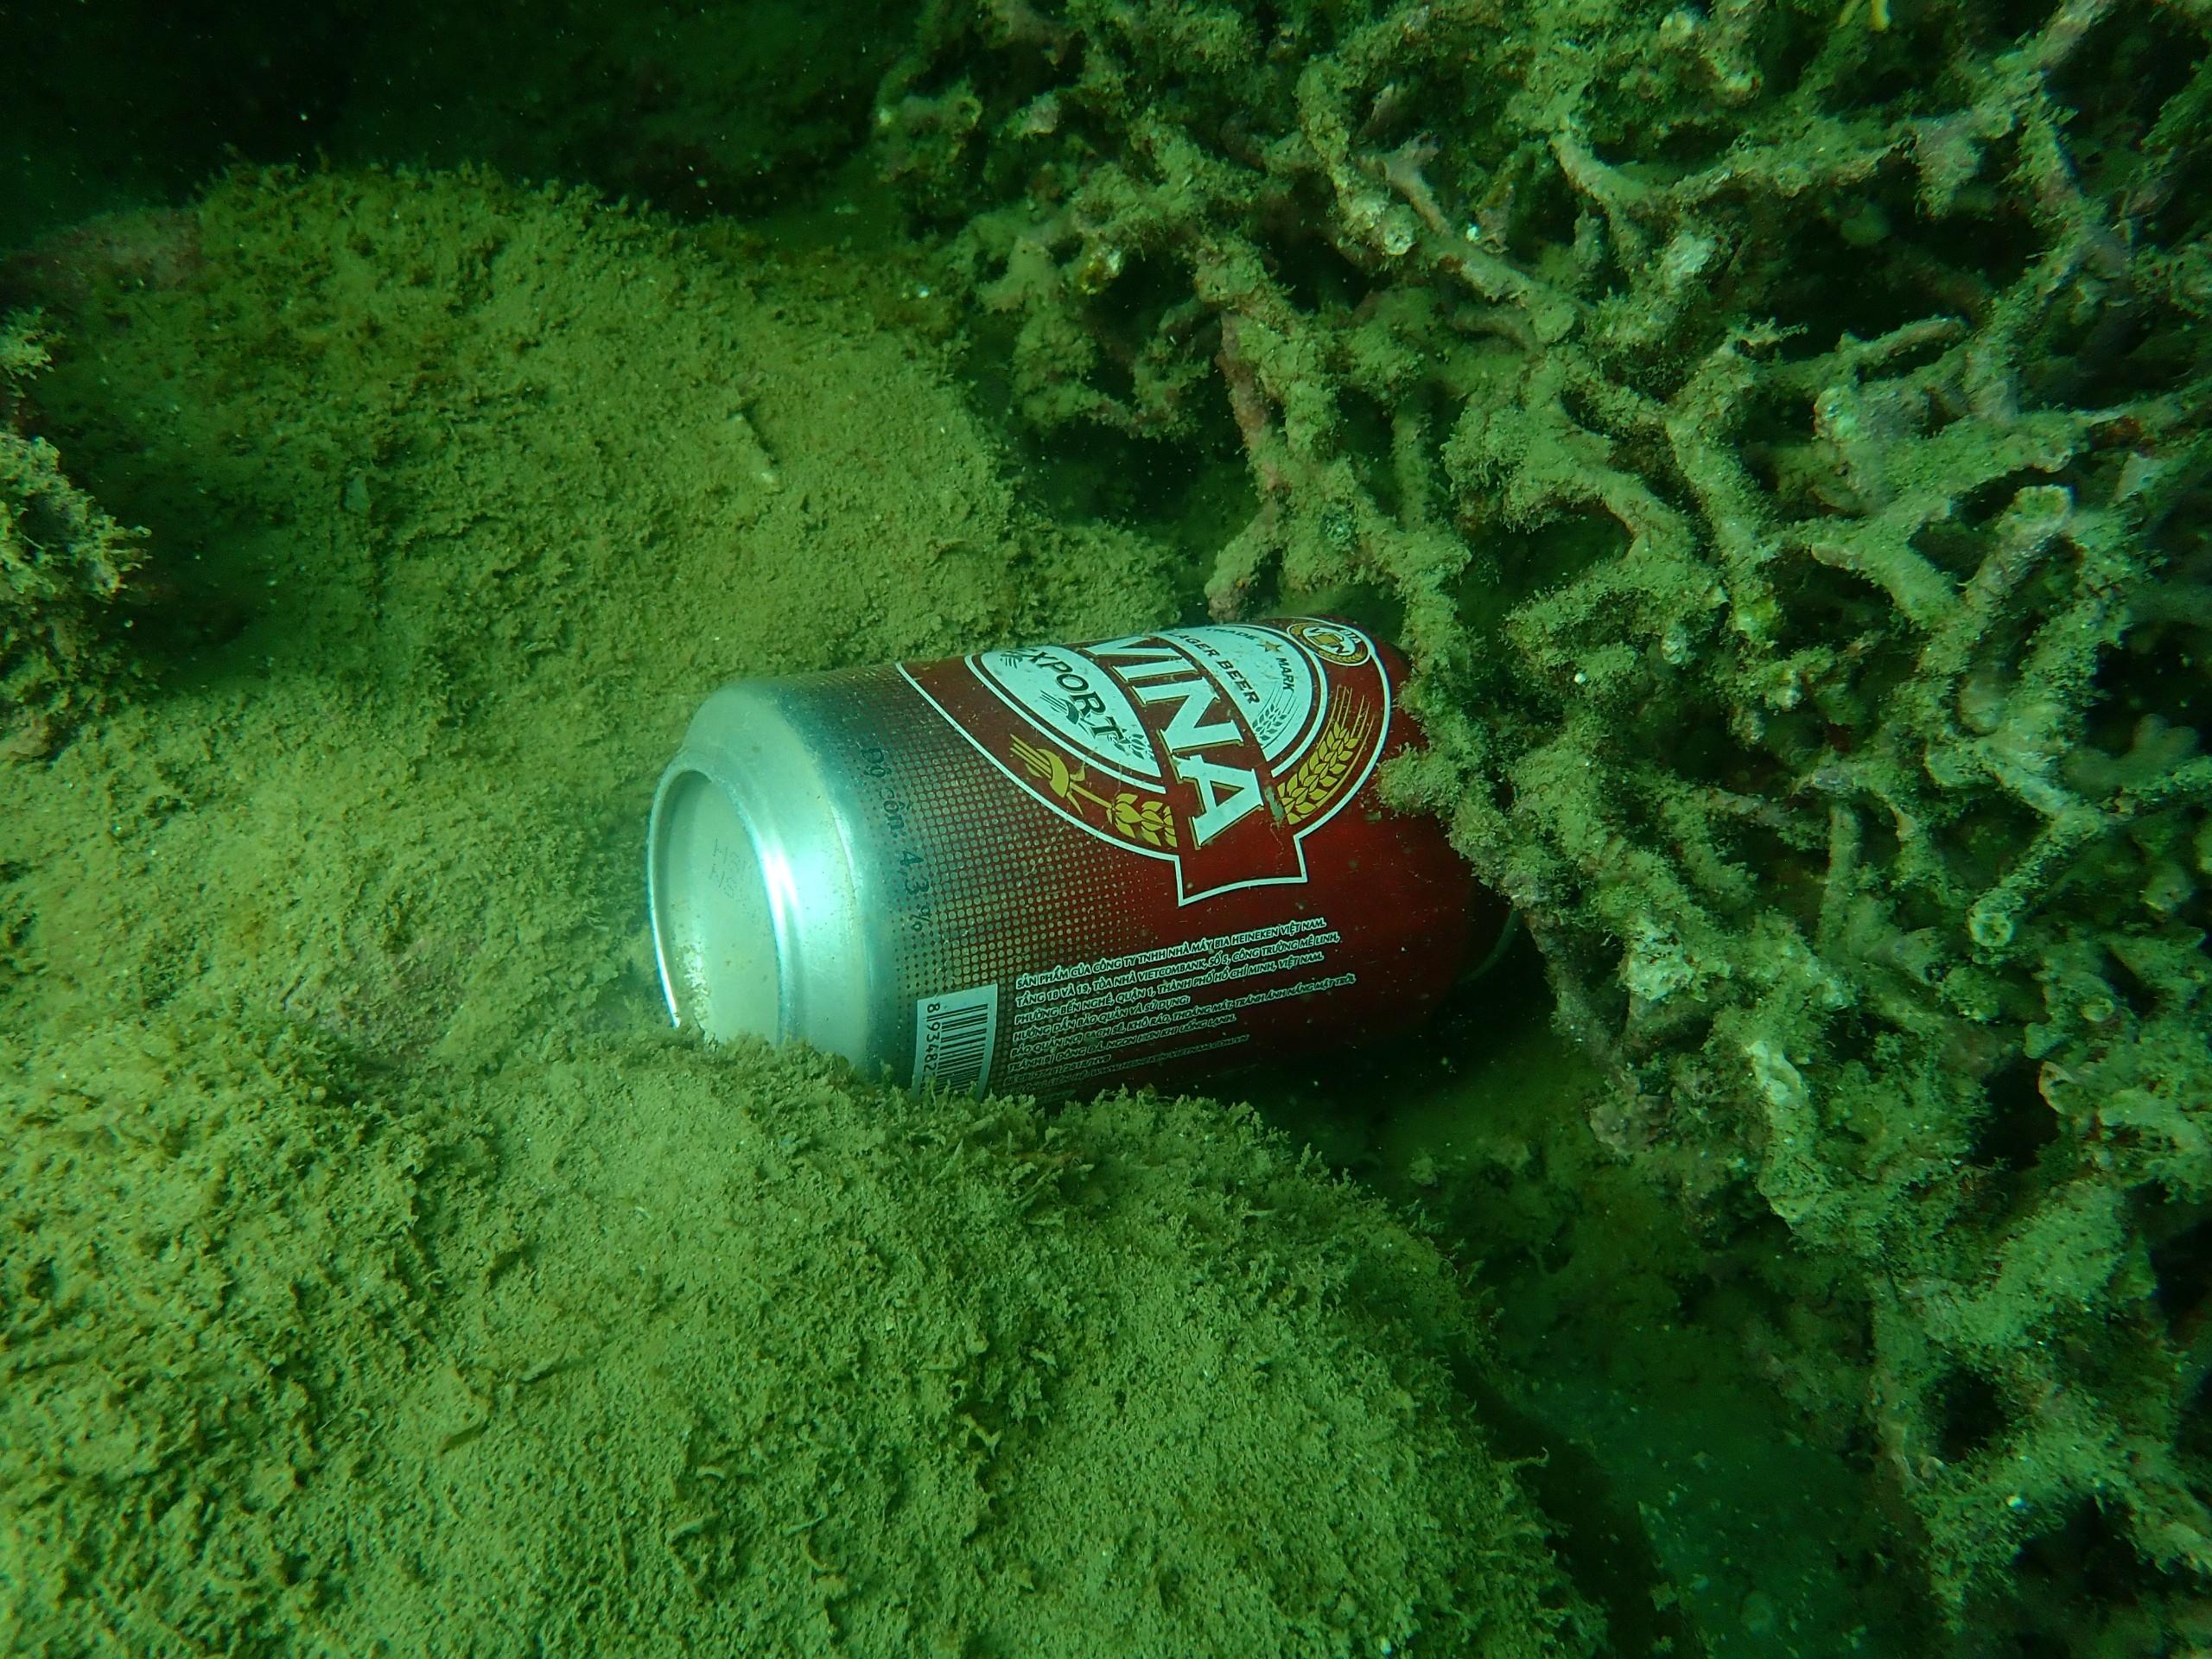 A beer can is stuck on the coral at the Hon Mun Nature Reserve in Nha Trang City, Khanh Hoa Province, Vietnam. Photo: Van Duc /Handout via Tuoi Tre